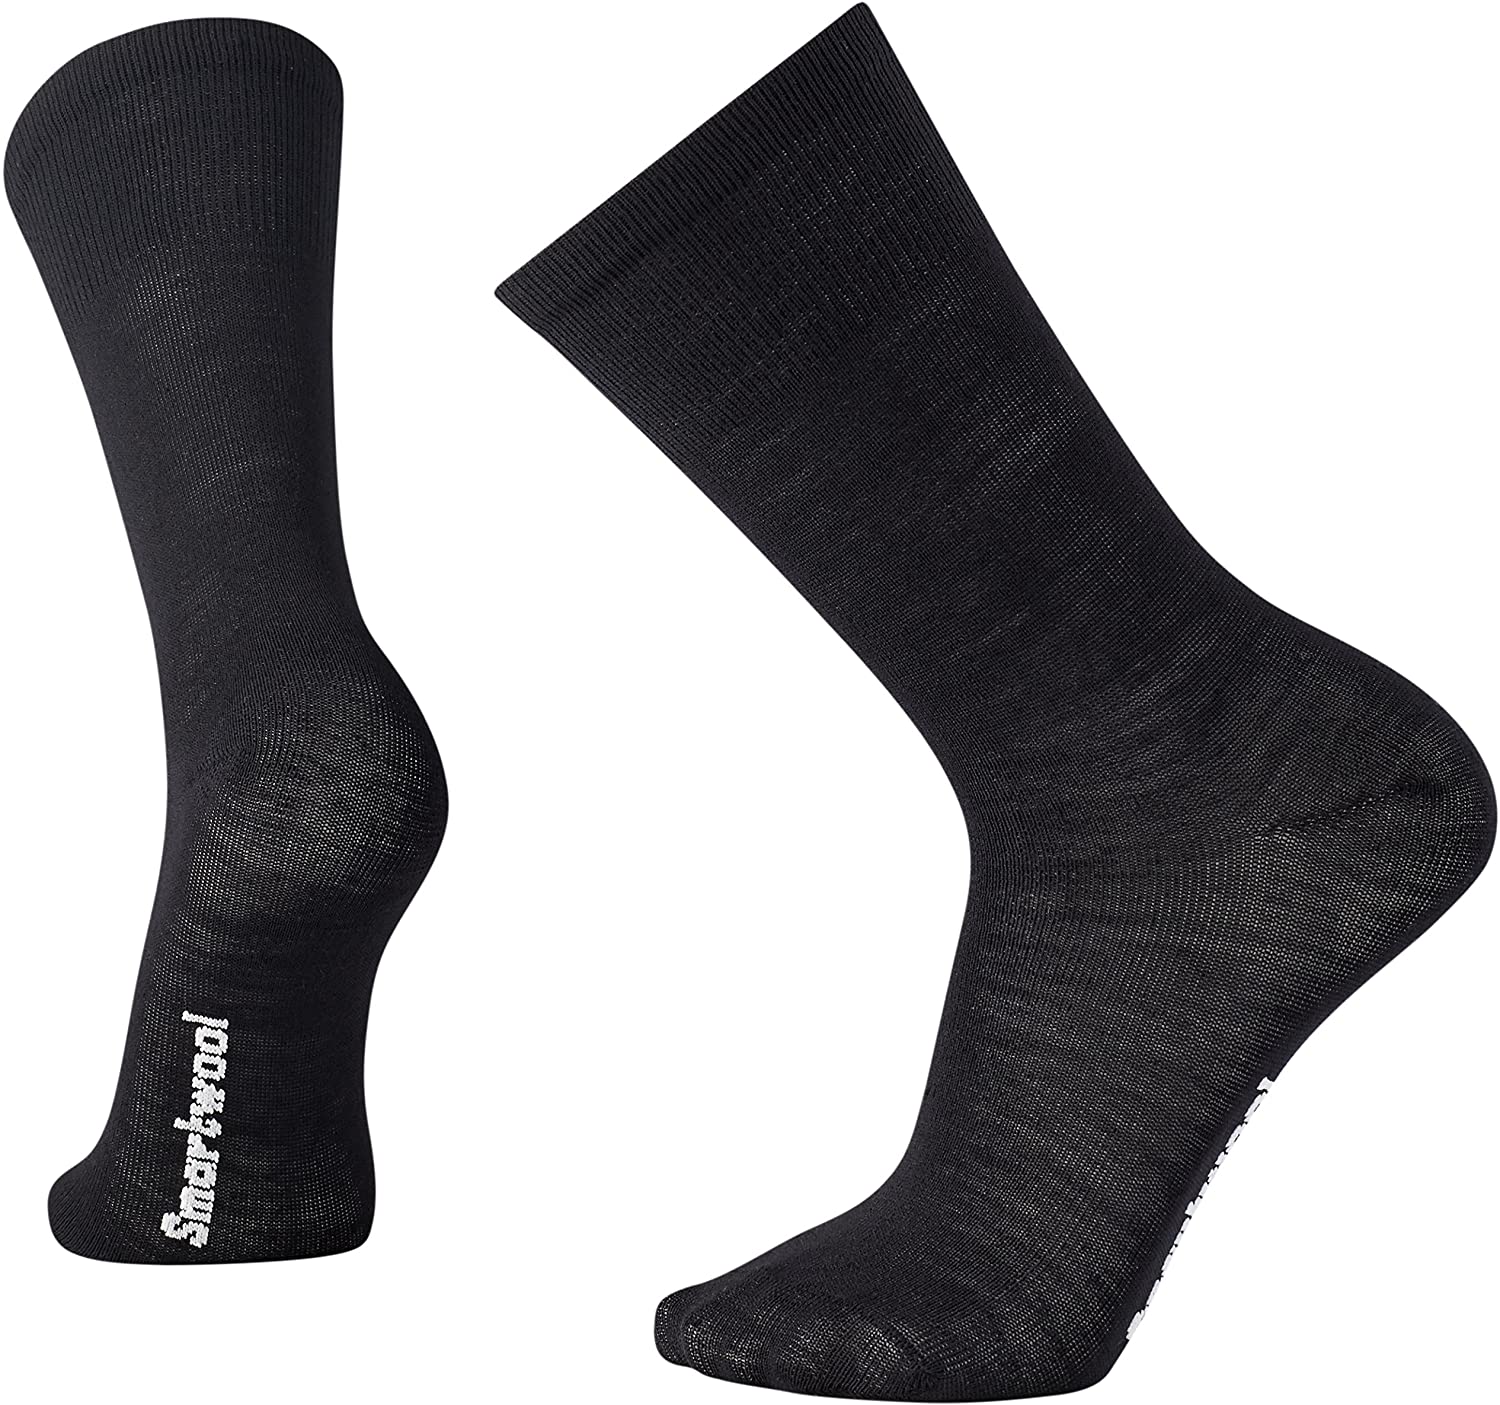 Unisex Smartwool Hike Liner Crew Sock in Black from the side